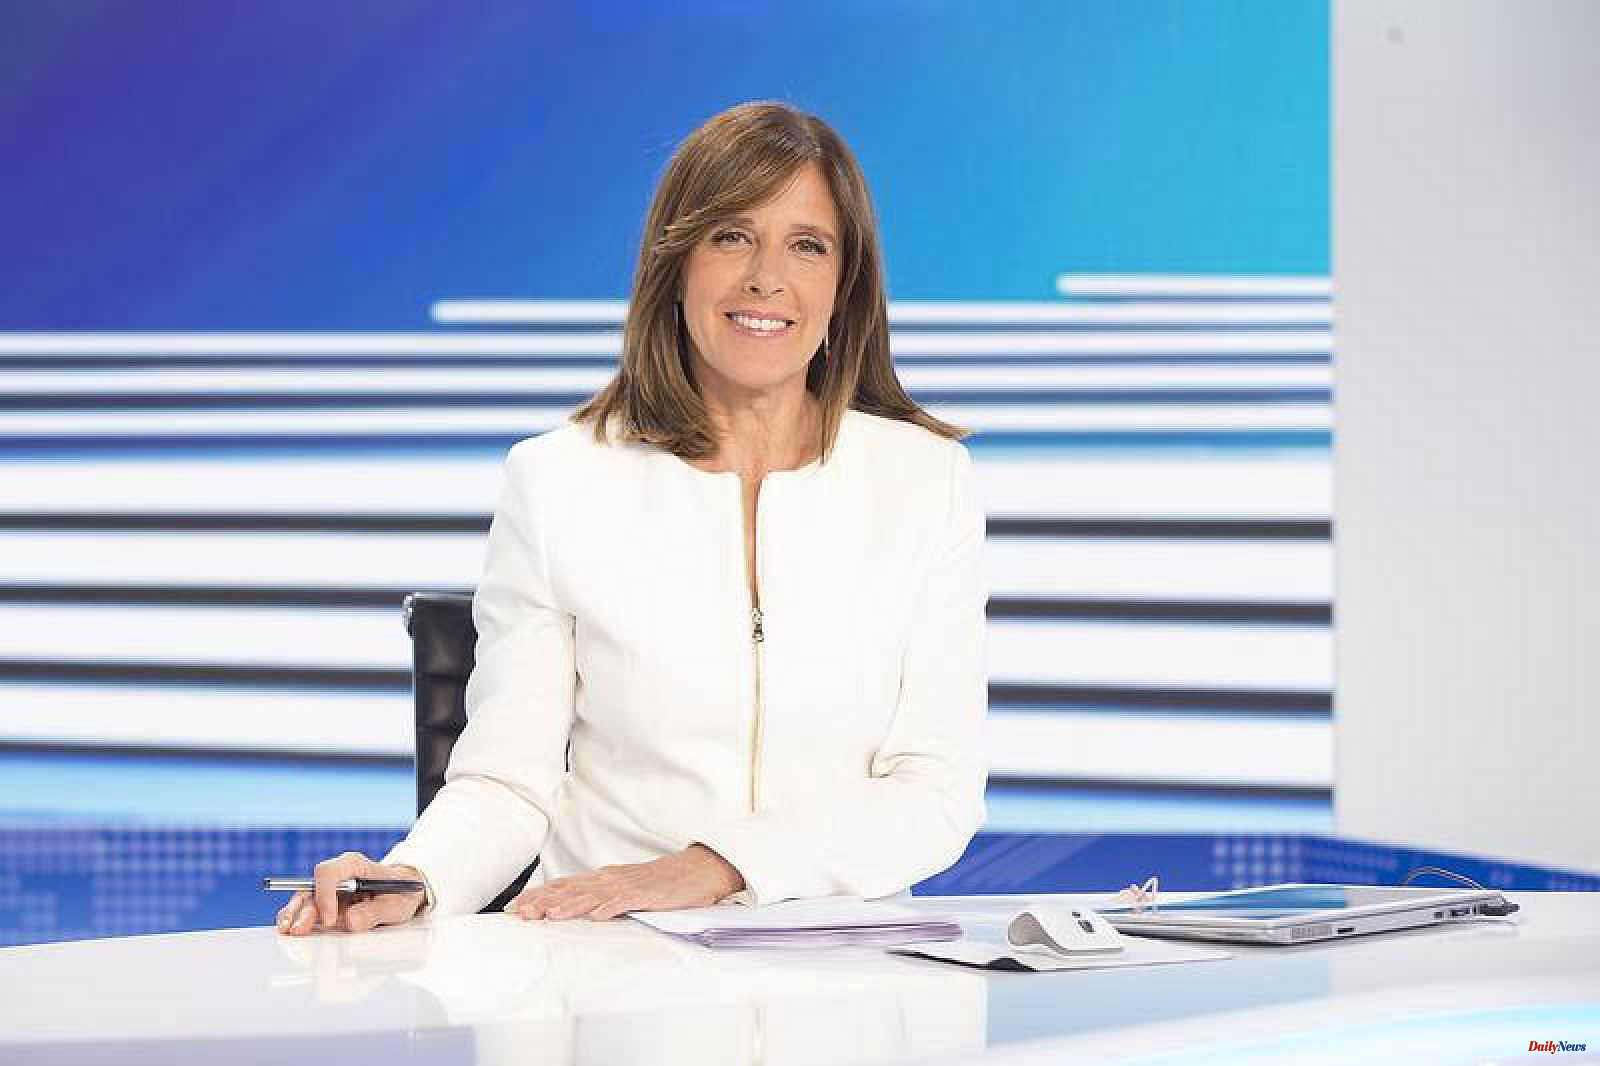 RTVE Ana Blanco will present a documentary program on La 1 with less salary than she earned on the newscast